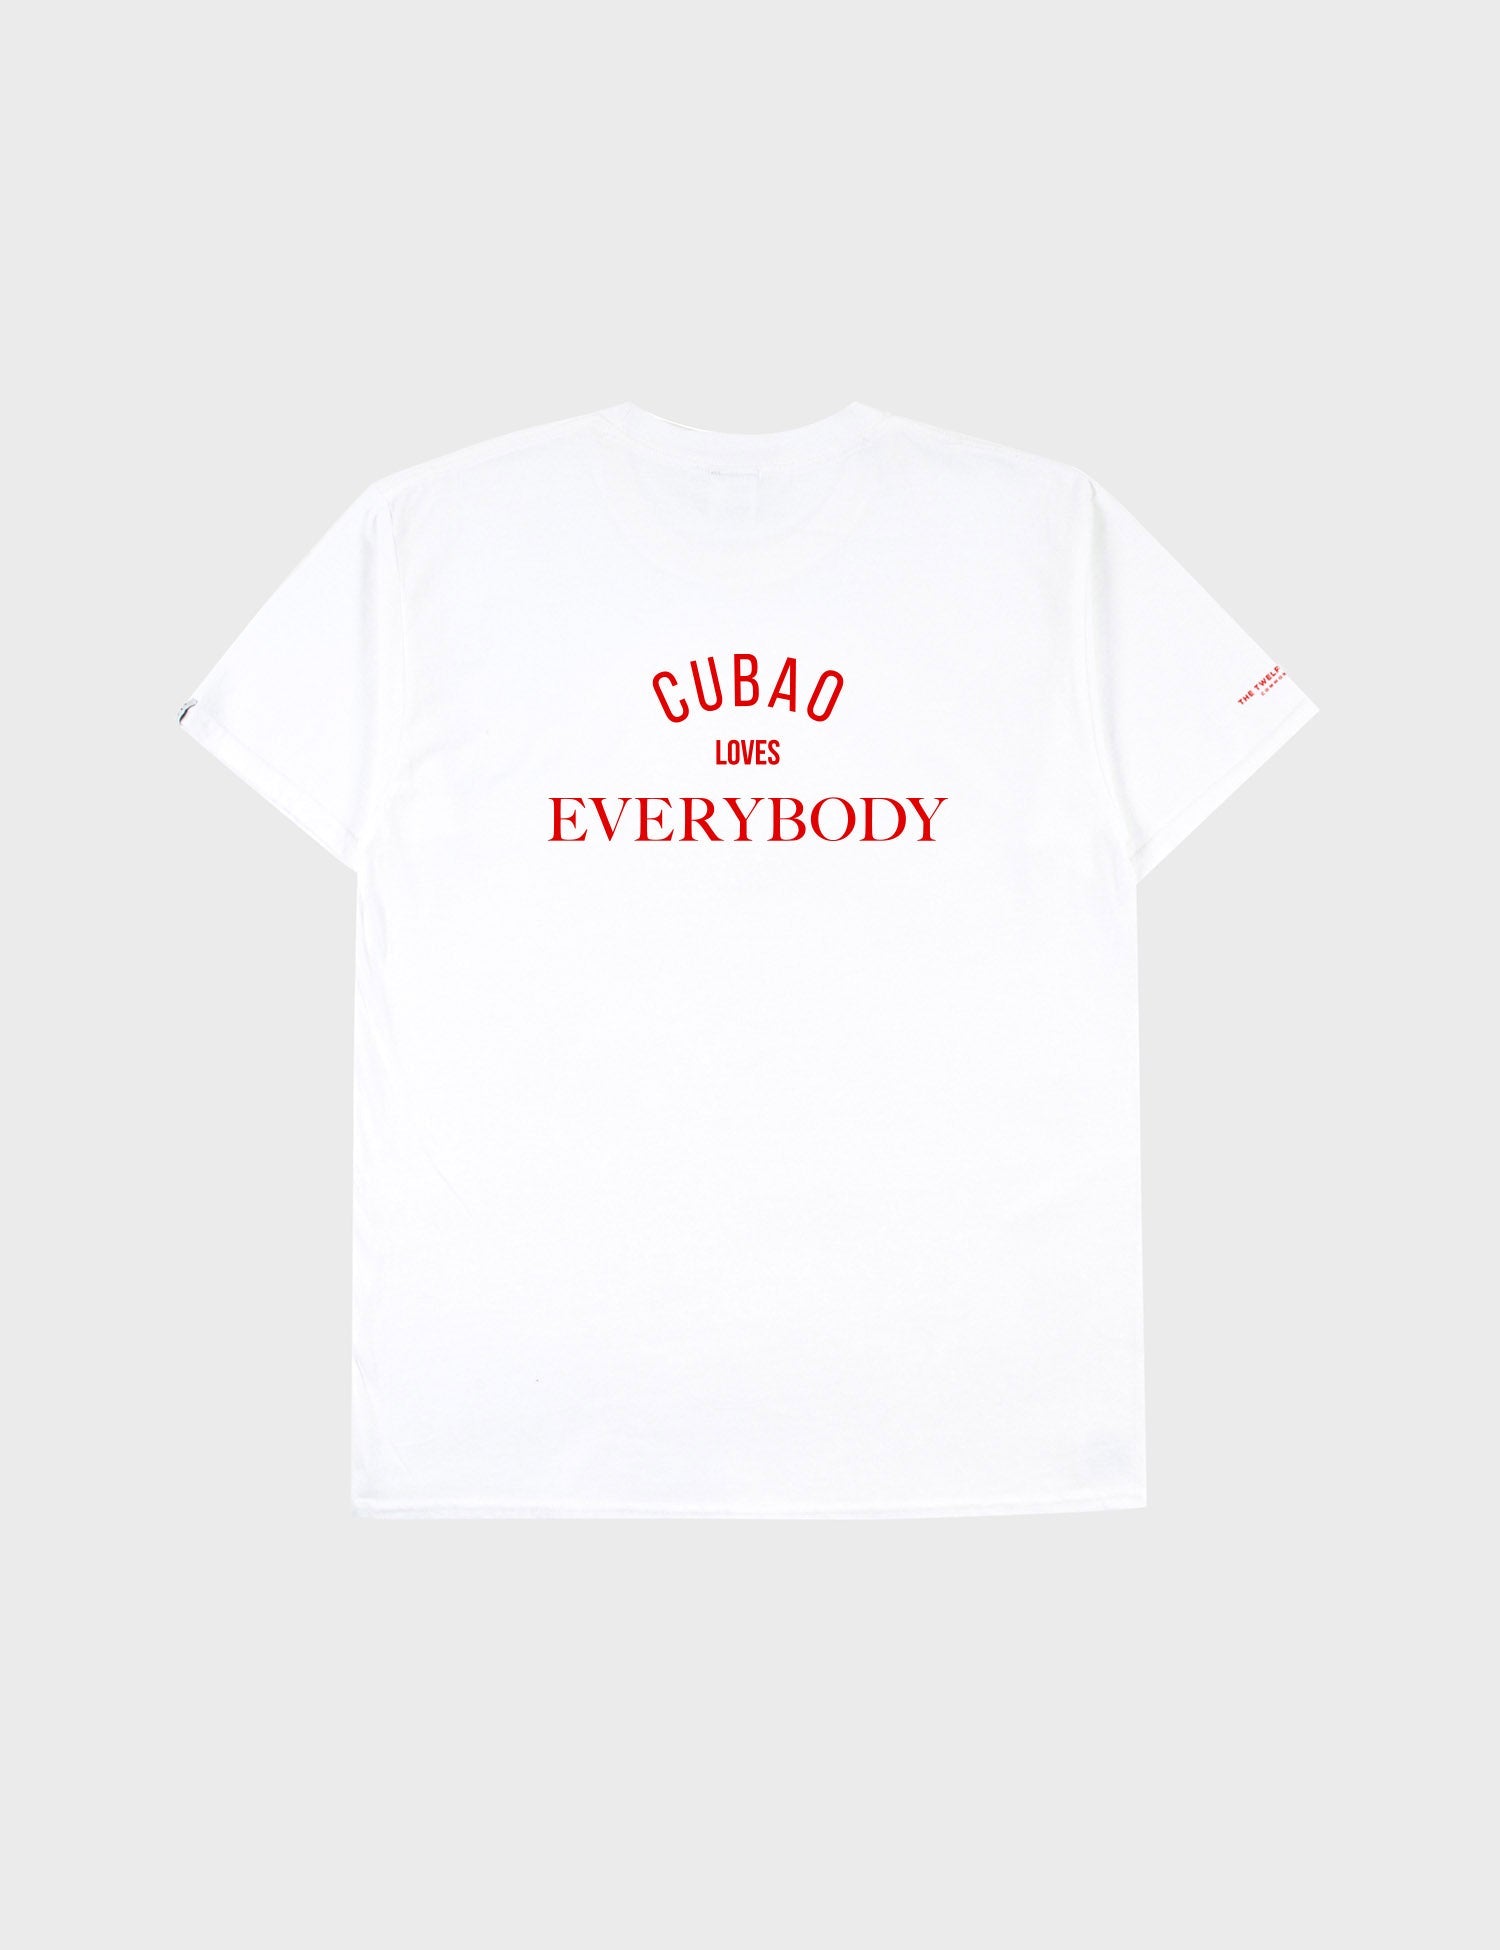 Cubao Loves Everybody (White)